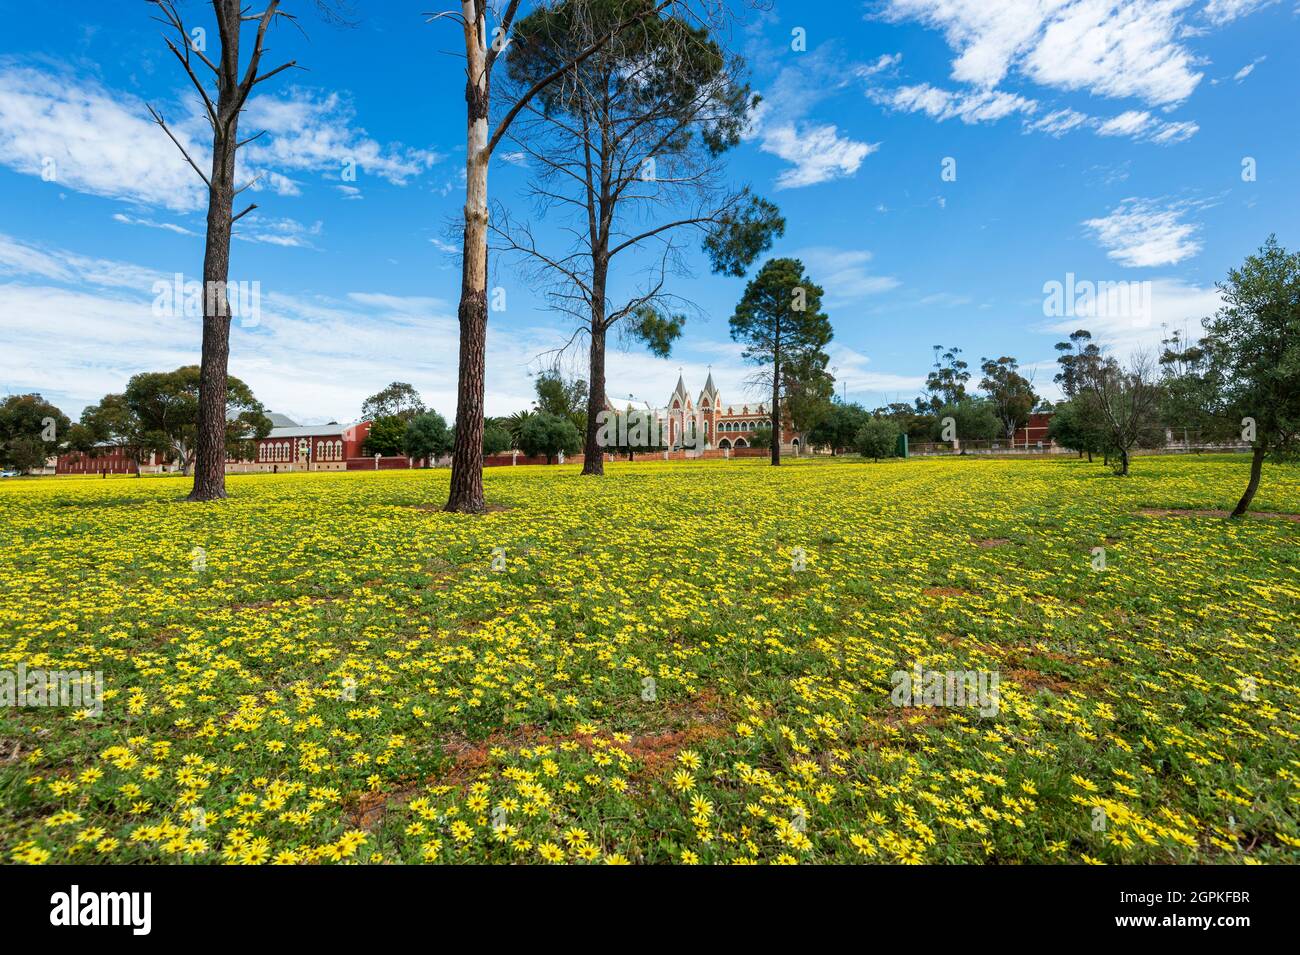 Field of yellow wildflowers in spring with View of St Gertrude’s College in the background, in the monastery town of New Norcia, Western Australia, Au Stock Photo